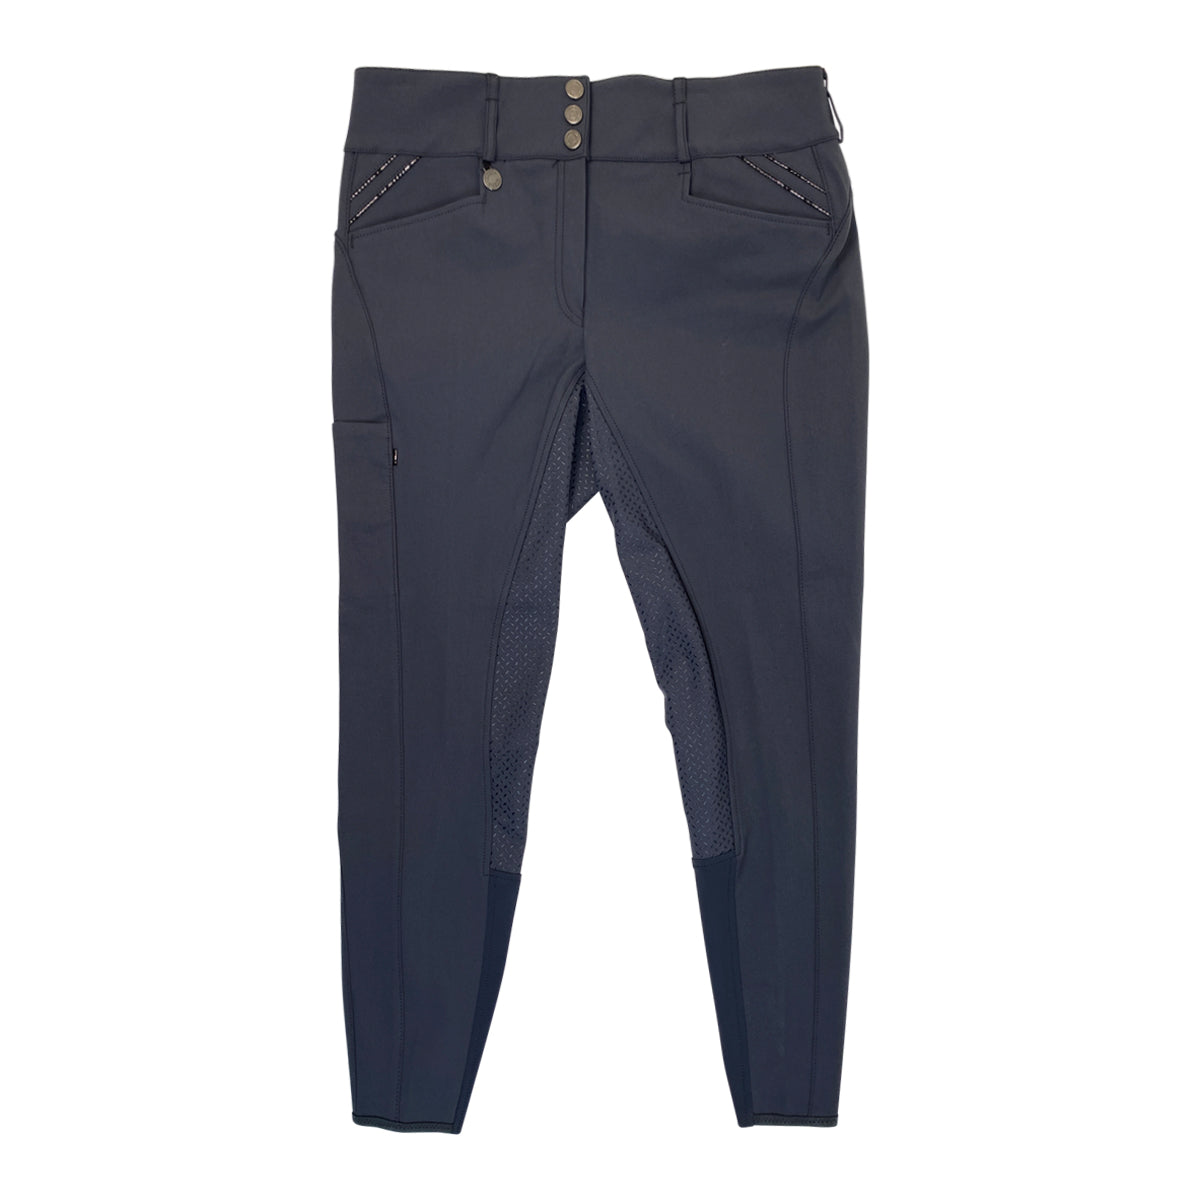 Pikeur 'Candela Glamour' Breeches in Grey